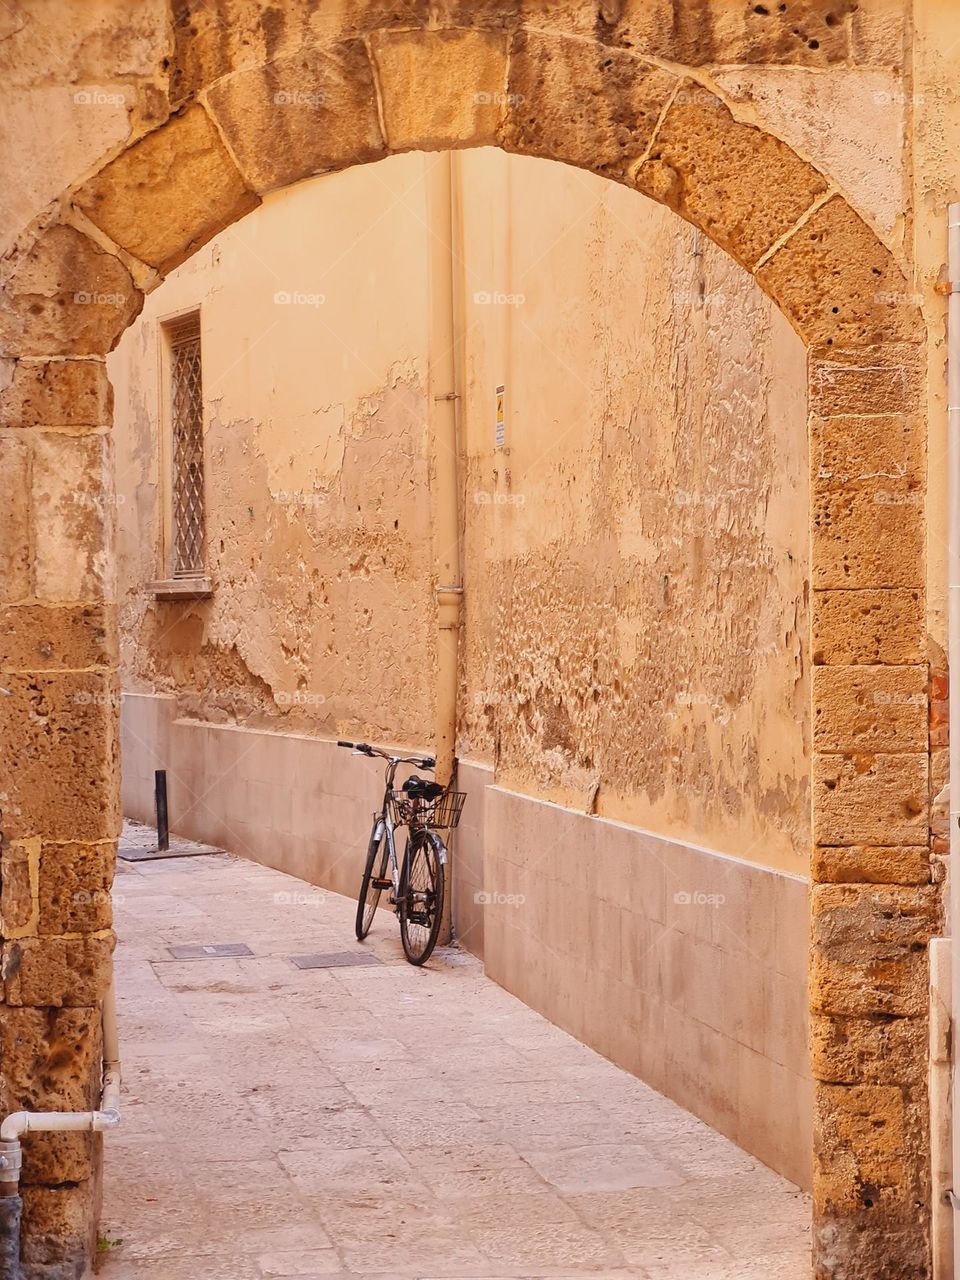 solitary bicycle leaning against the wall under an arch in the historic center of Bari in Italy